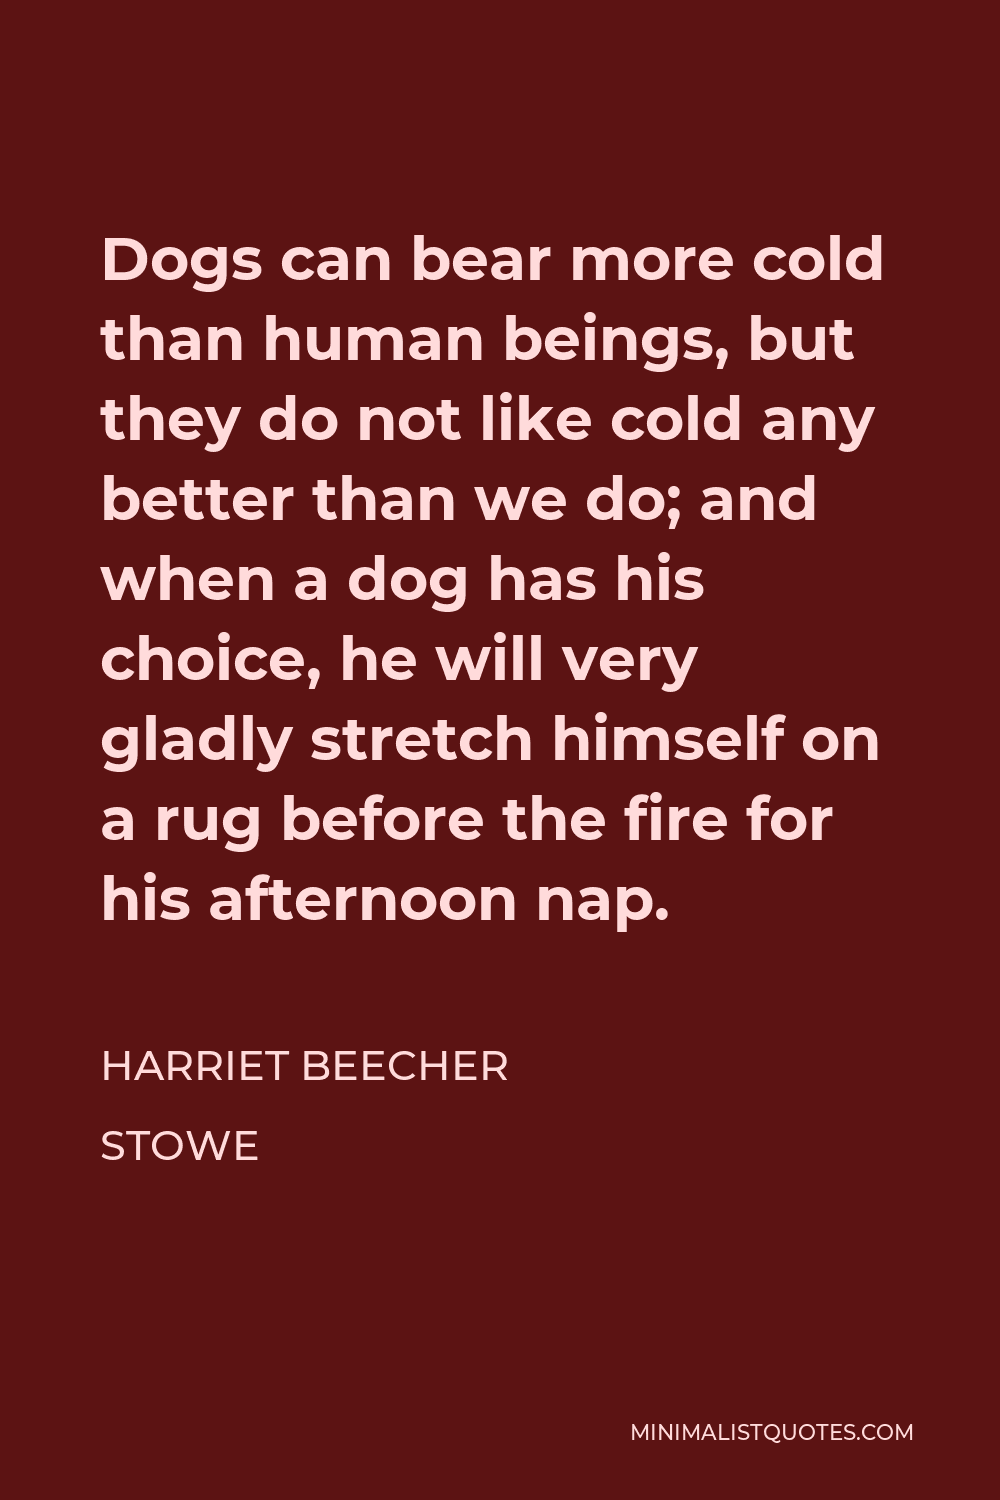 Harriet Beecher Stowe Quote - Dogs can bear more cold than human beings, but they do not like cold any better than we do; and when a dog has his choice, he will very gladly stretch himself on a rug before the fire for his afternoon nap.